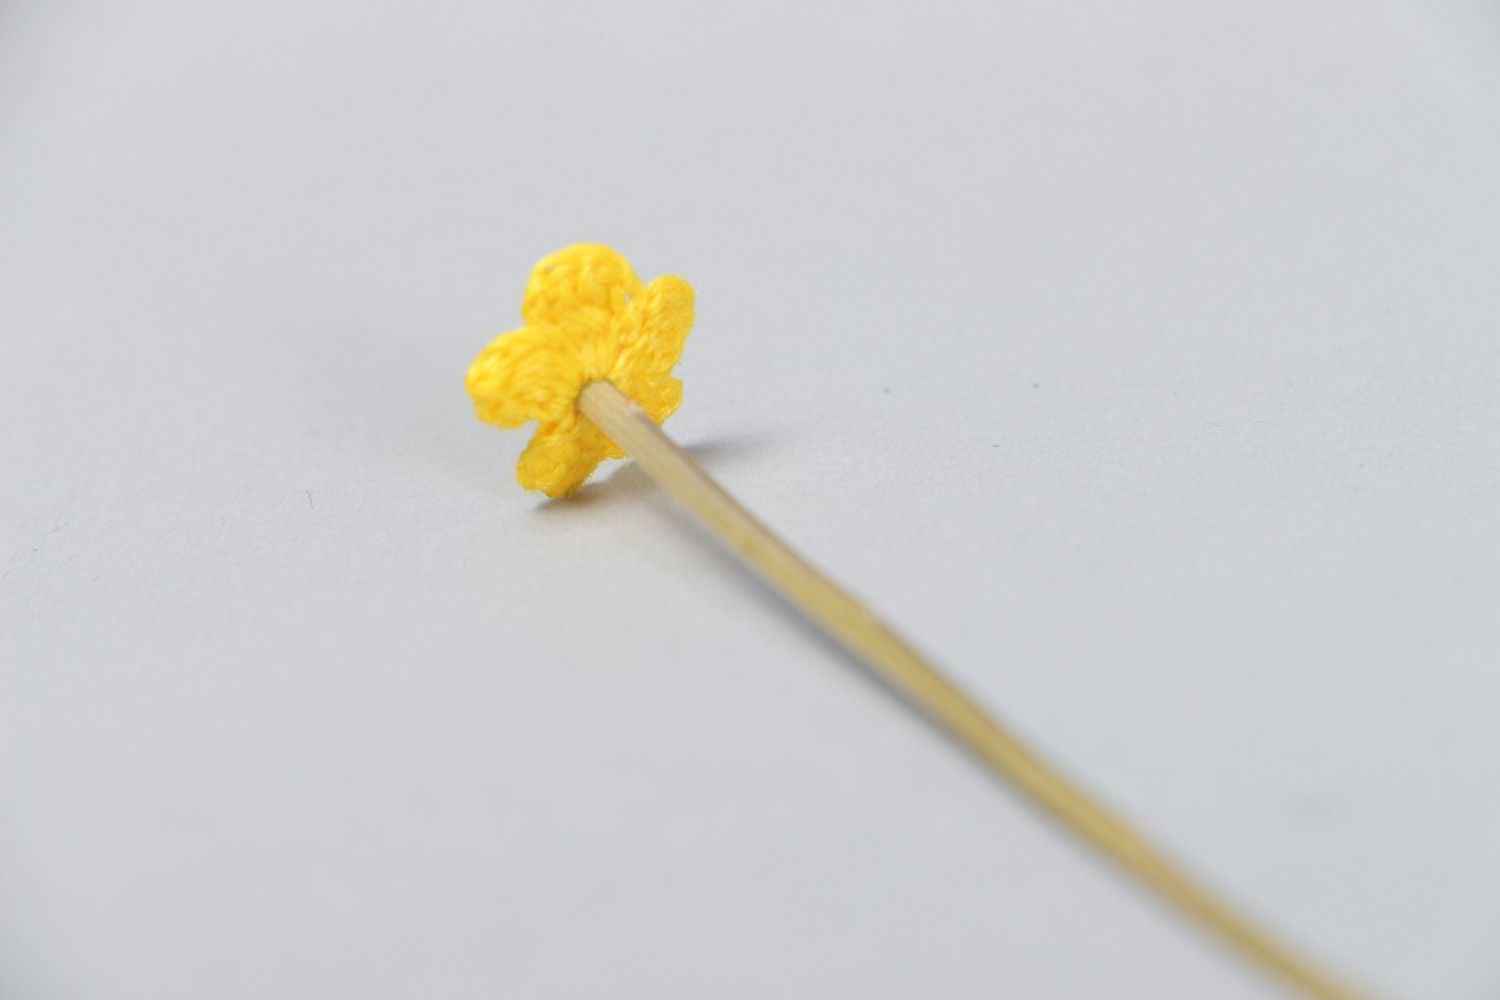 Handmade tender small artificial yellow flower crocheted of cotton threads photo 4